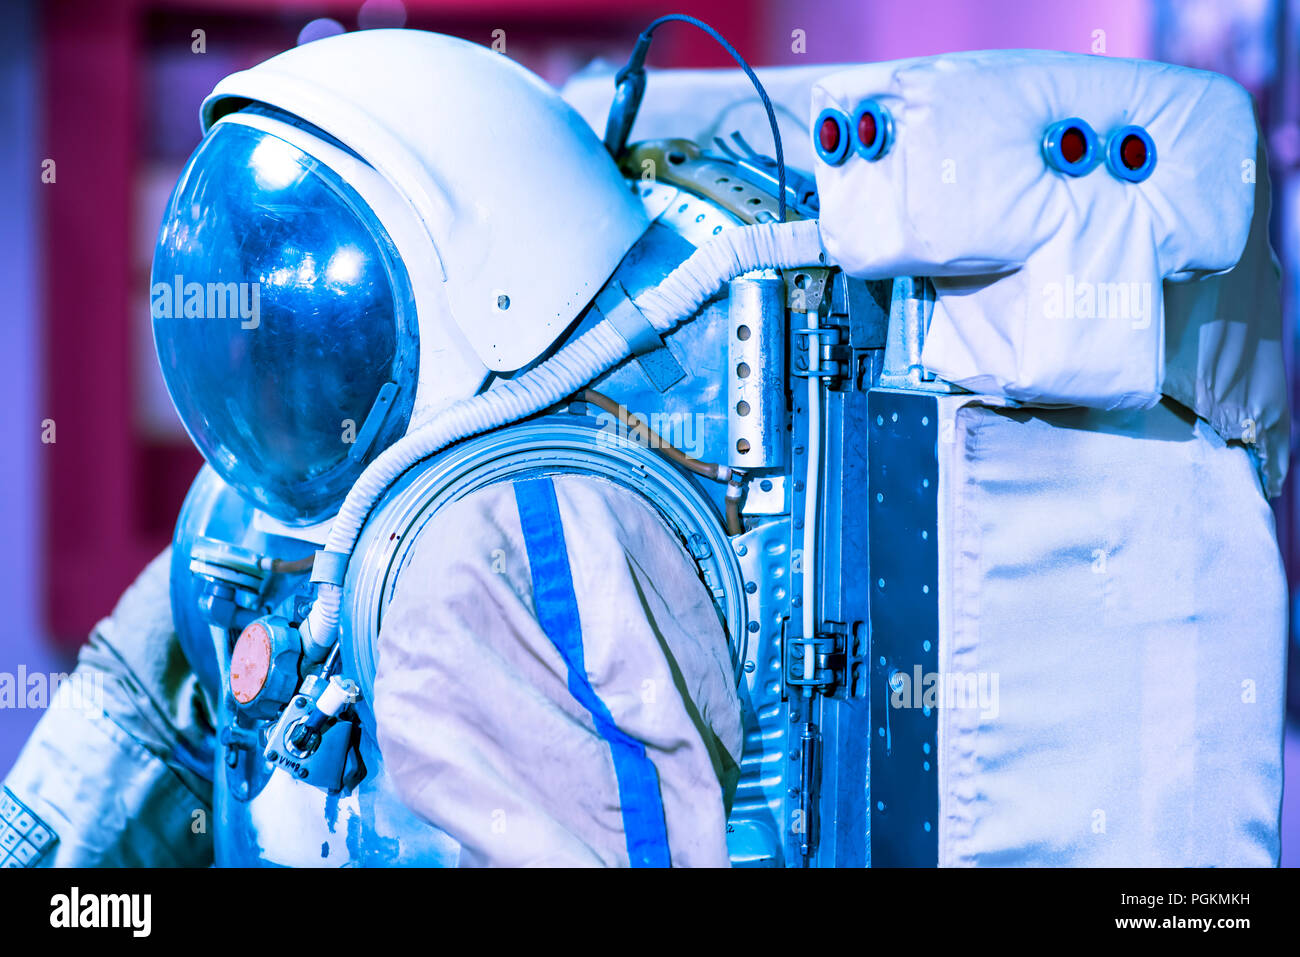 A astronaut and cosmonaut perform work on a space station while deap space. Stock Photo